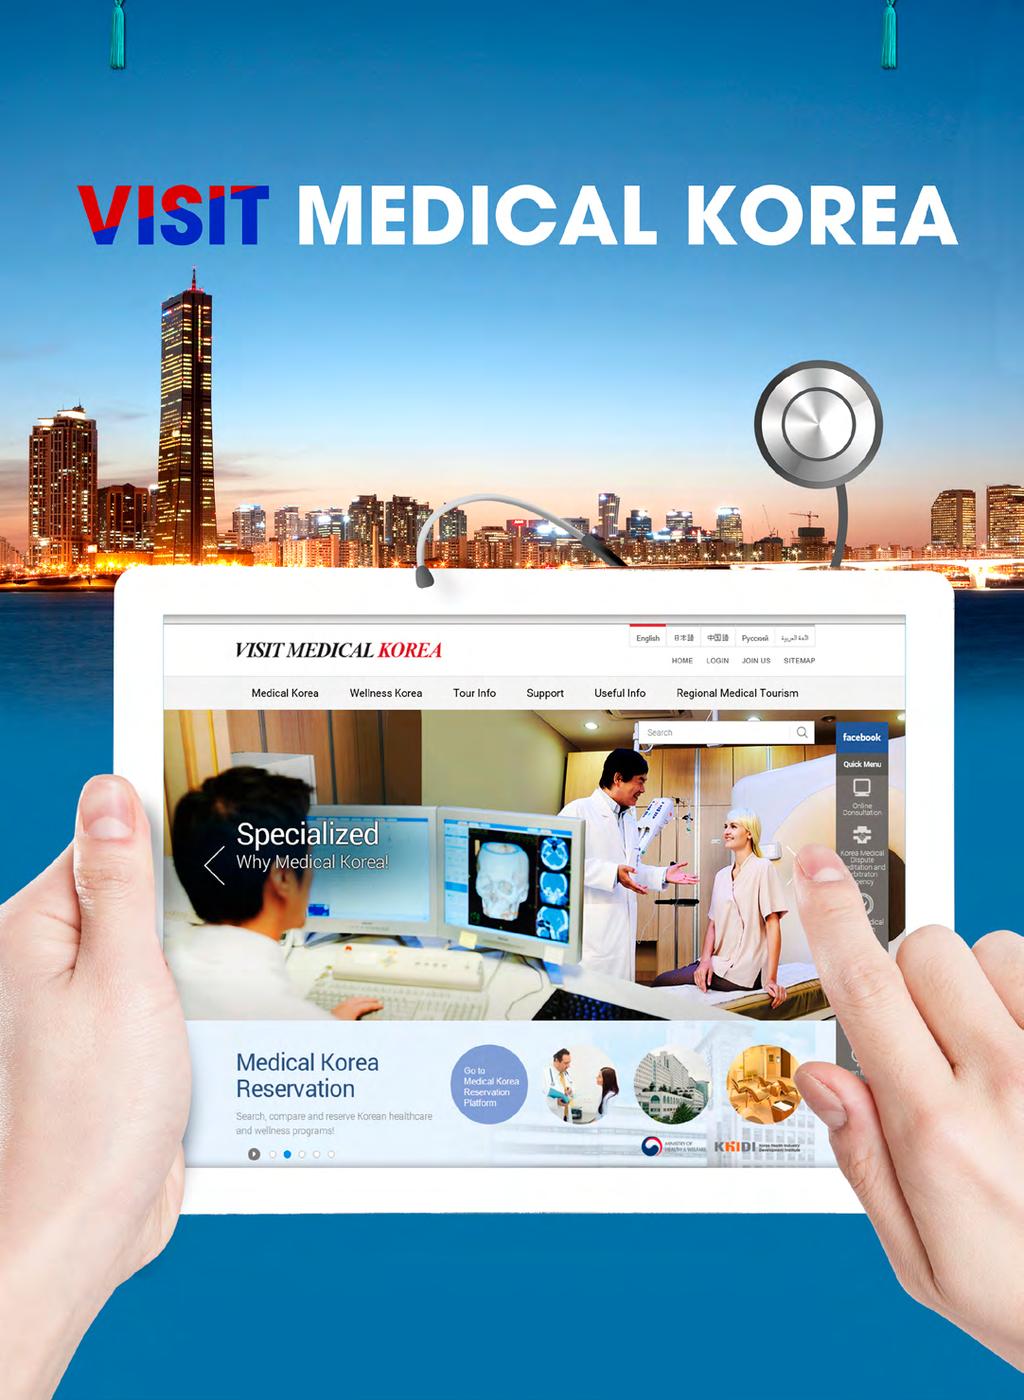 Medical Korea Information Center provides information on medical institutions, legal assistance and other information on medical services in Korea to foreign patients in their native languages.